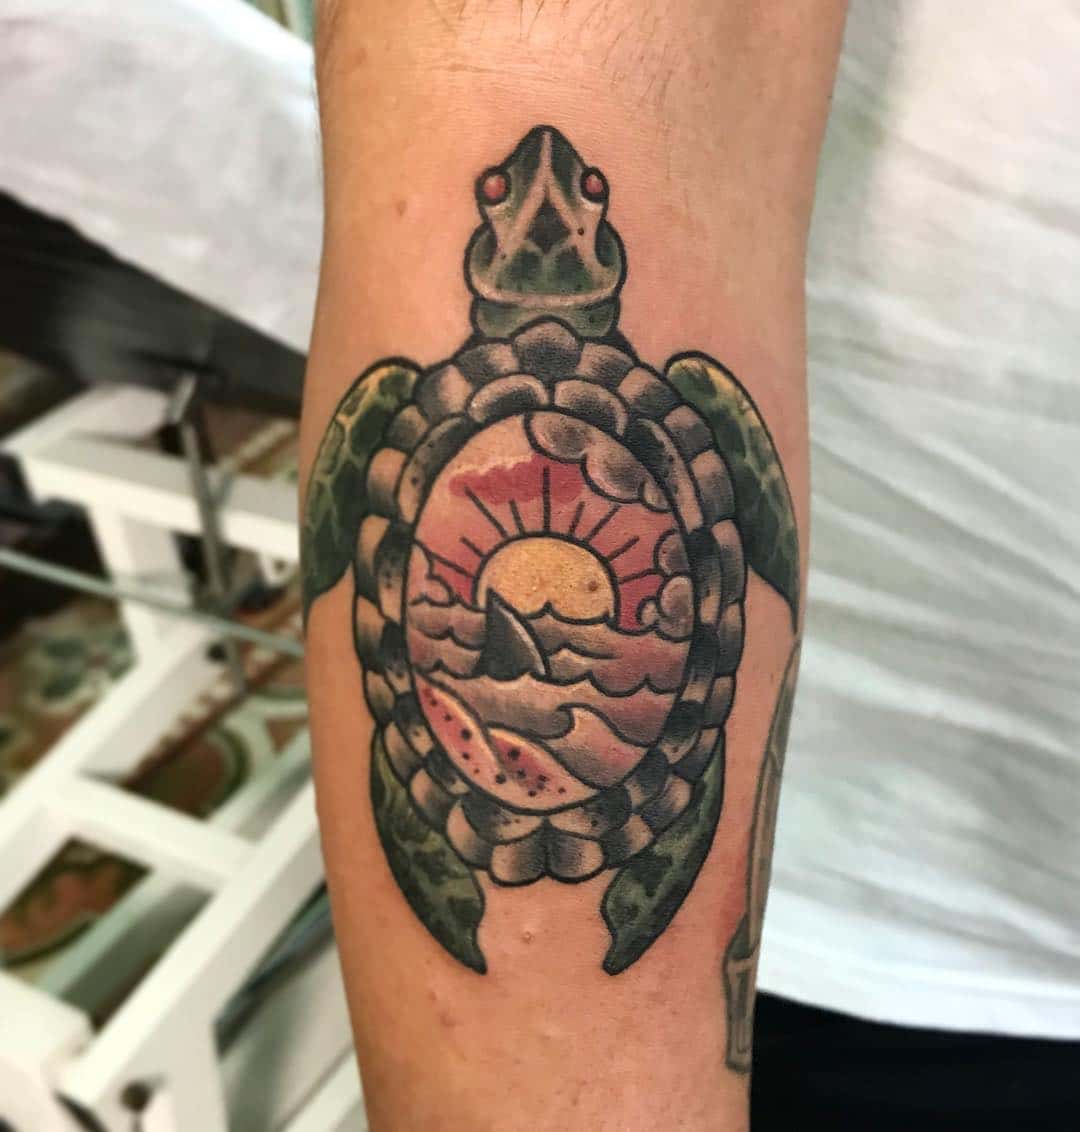 125 Unique Turtle Tattoos With Meanings And Symbolisms That You Can Get This Winter Wild Tattoo Art,Mind Eraser Six Flags America